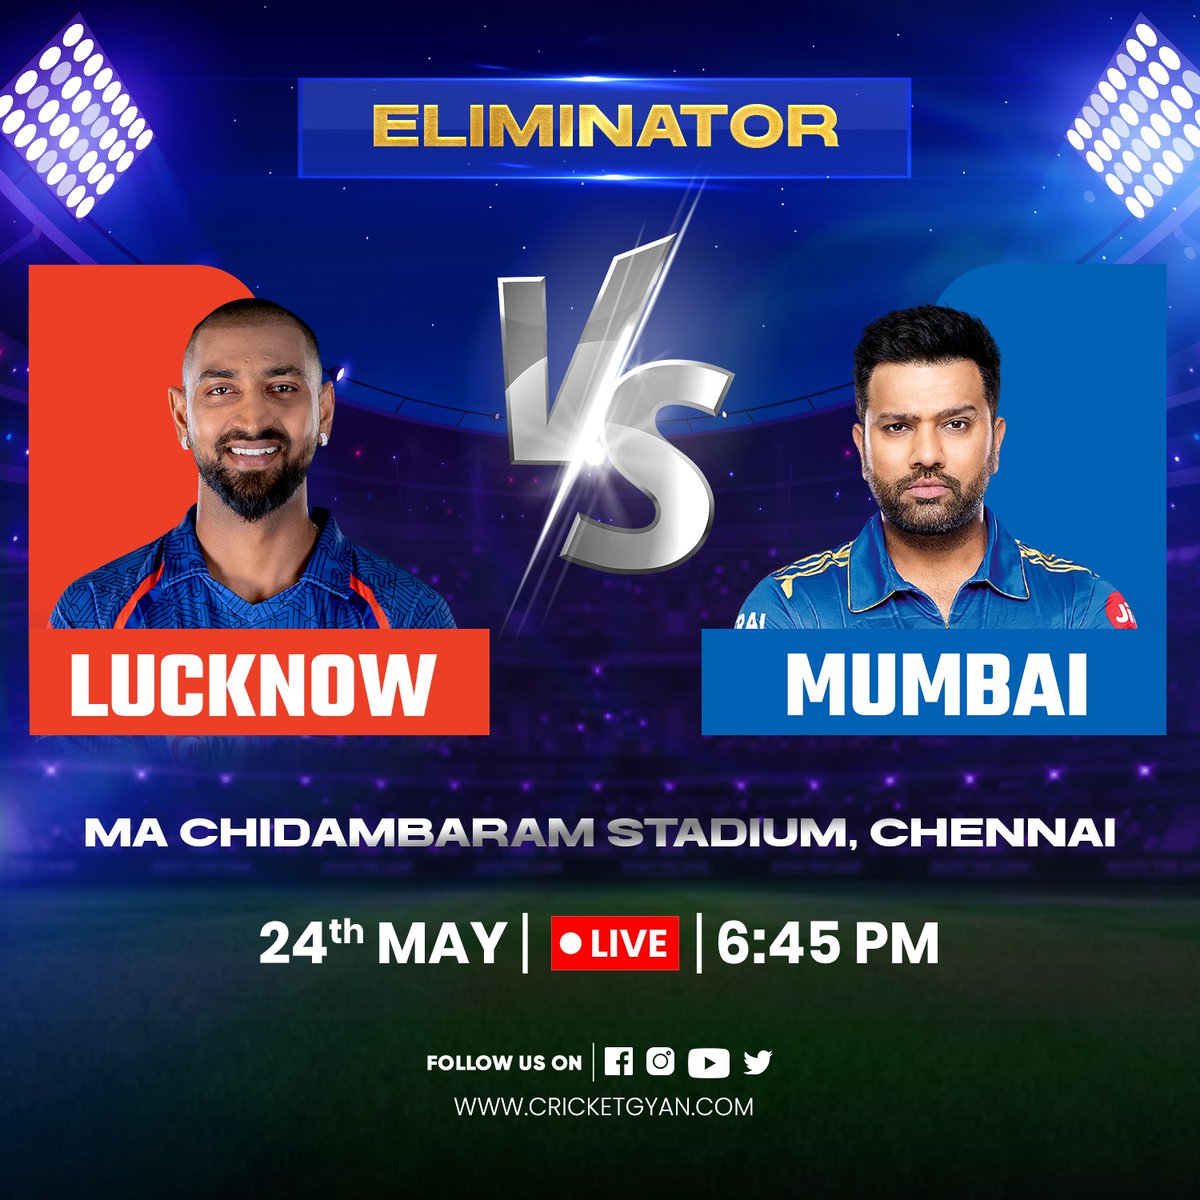 Eliminator mode: ON! LSG and MI Who is going to book their flight ticket for Ahmadabad to clash with GT? #mi #lsg #ipl #gambhir #pooran #rohit #cricket #ChennaiSuperKings